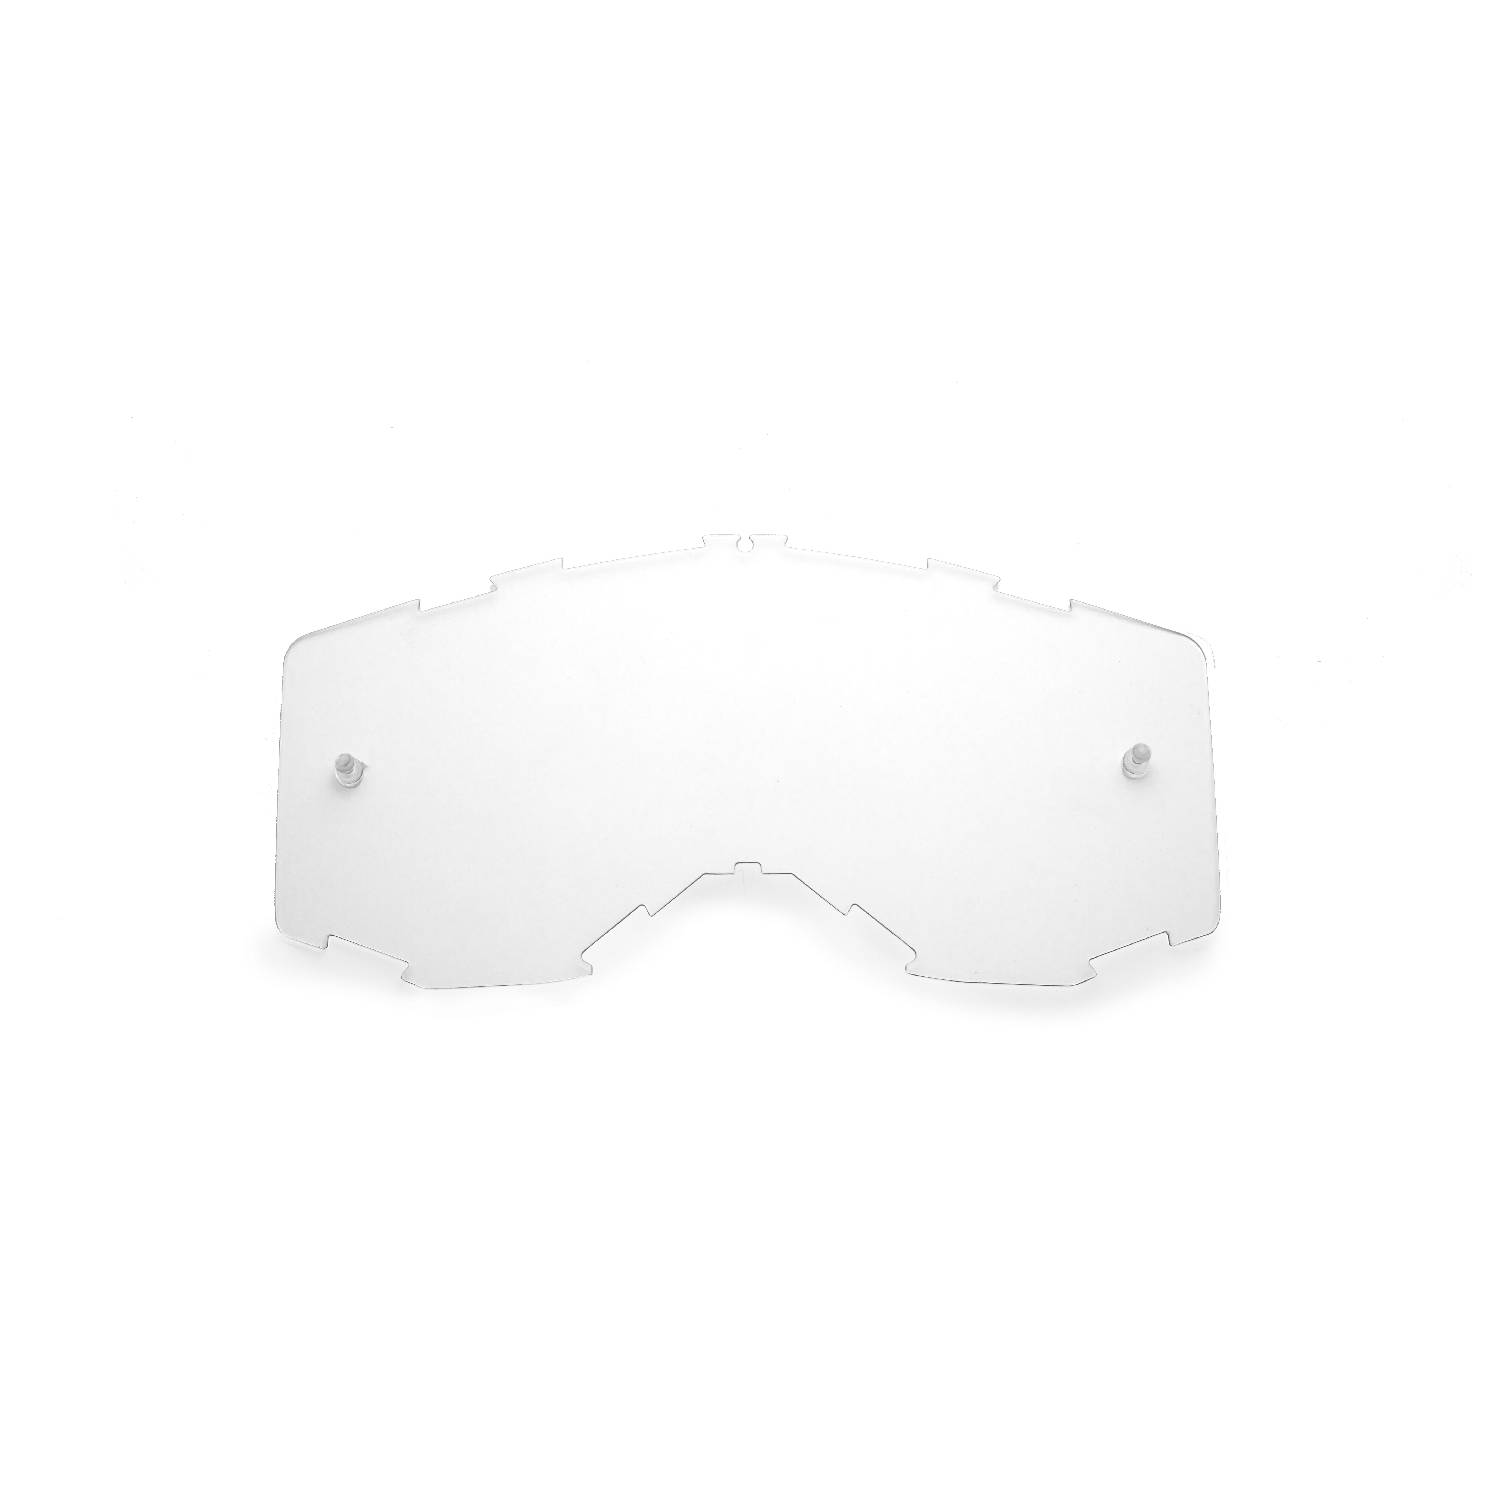 clear replacement lenses for goggles compatible for Aka Magnetika Sheet / Vortika Race Sheet / Vortika Pro Sheet / Vortika Sport Sheet goggle